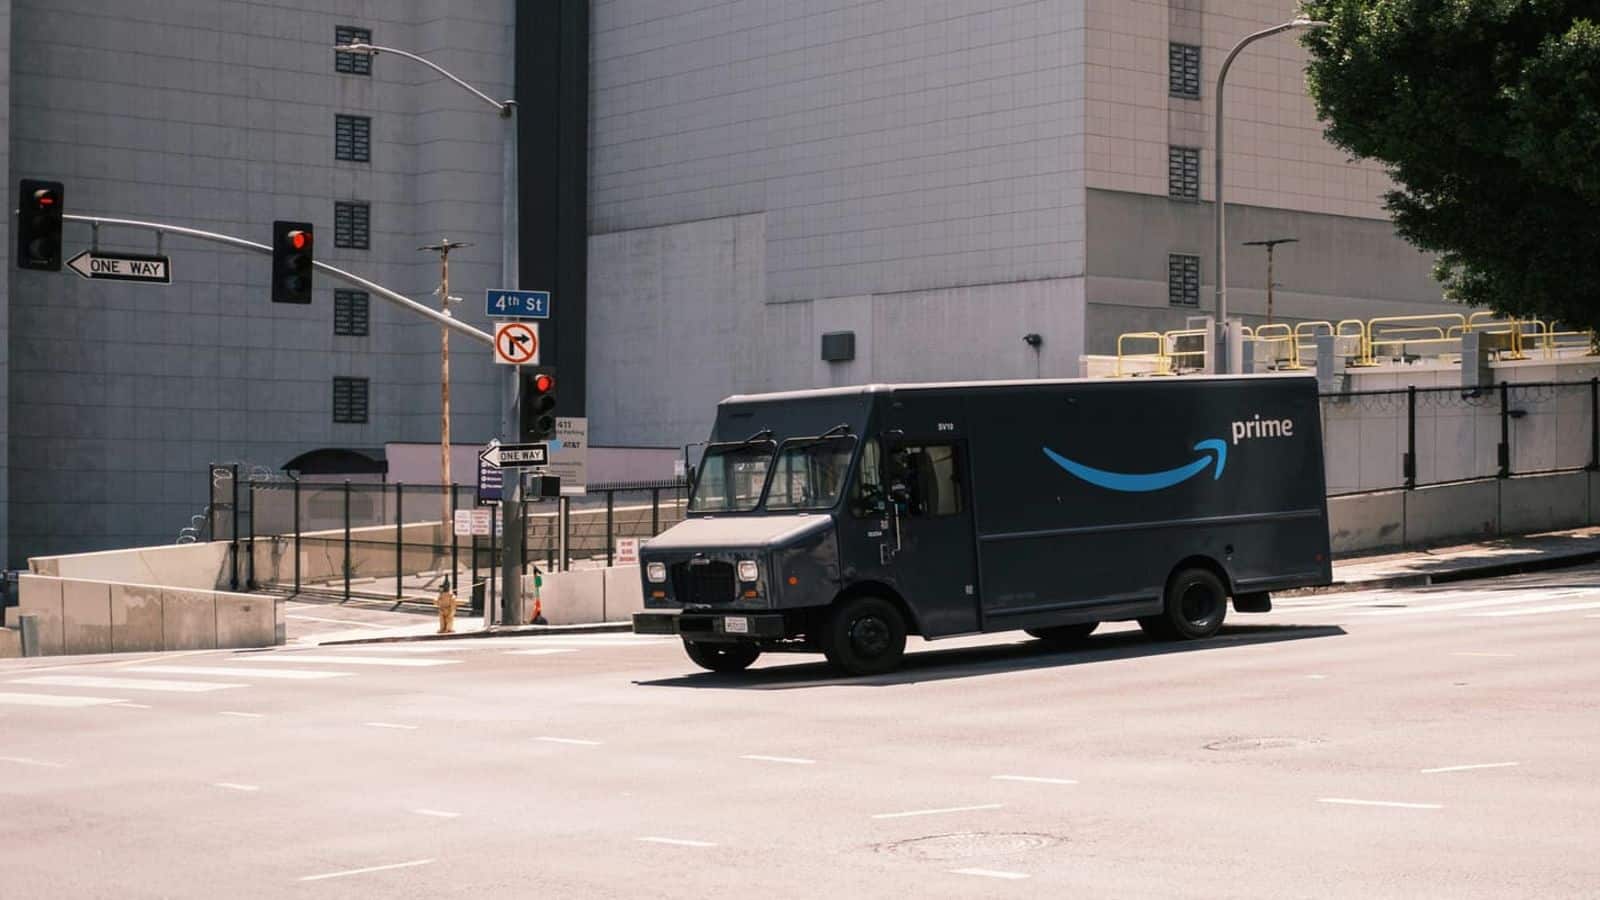 Meet Wayne: The bad boss of US-based Amazon delivery drivers